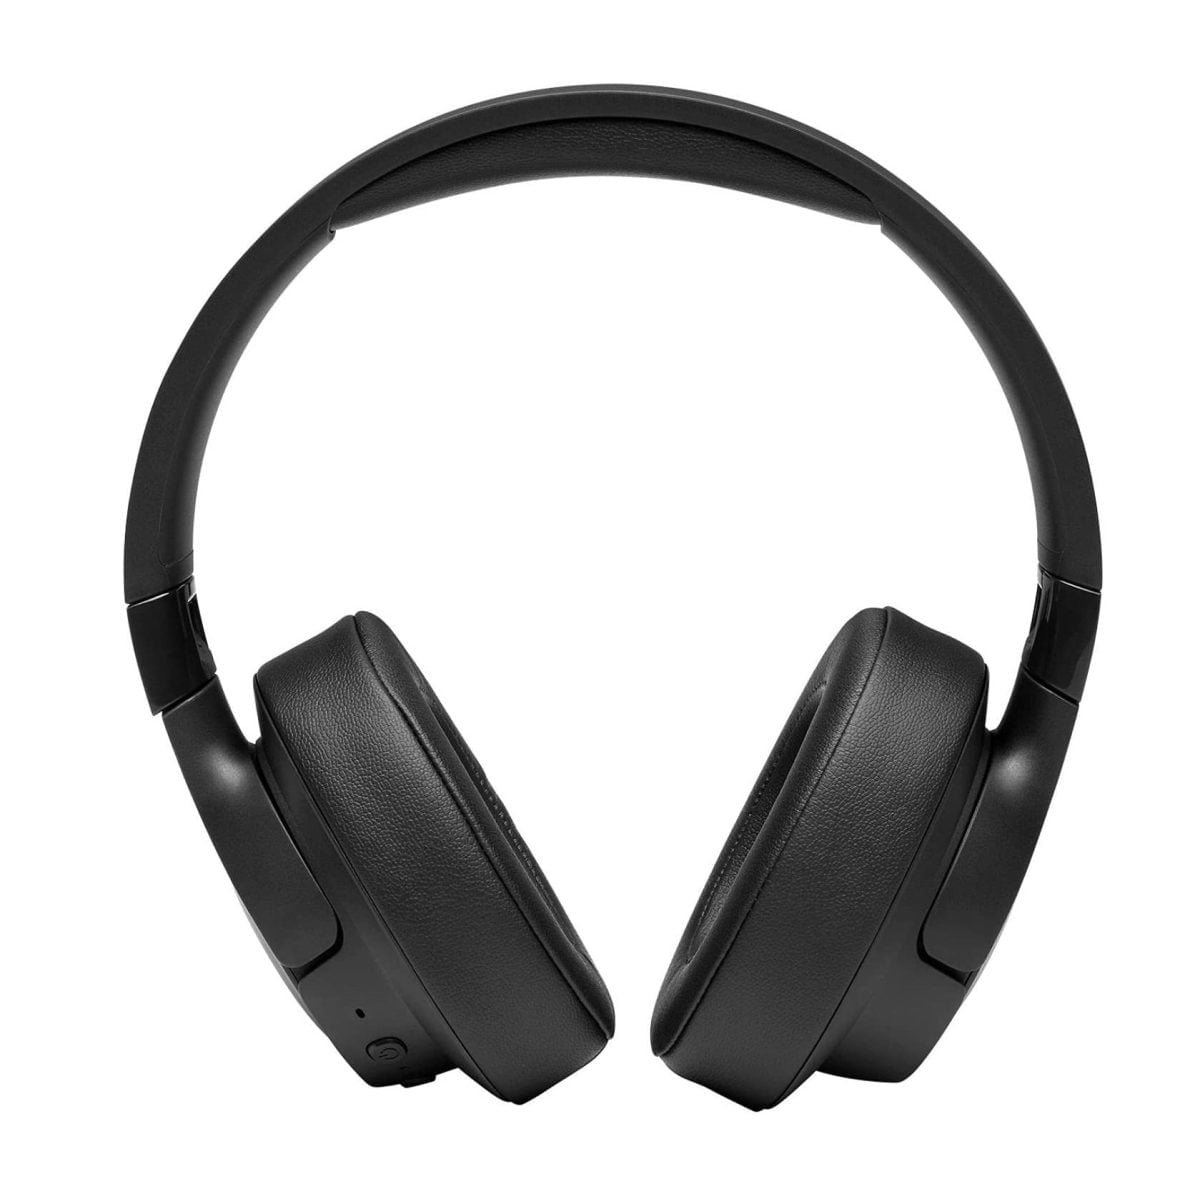 61Rledrbyhl. Ac Sl1500 Jbl &Lt;H1&Gt;Jbl Tune 750Btnc Wireless Noise Cancelling Headphones - Black&Lt;/H1&Gt; Https://Www.youtube.com/Watch?V=3Nvhiwevpho Jbl Tune 750Btnc Wireless Headphones Feature Powerful Jbl Pure Bass Sound And Active Noise-Cancelling For Punchy Bass And An Immersive Audio Experience. The Lightweight Over-Ear Design Offers Maximum Comfort And Sound Quality While Ready To Travel Everywhere You Go With Its Compact Foldable Competence. Up To 15 Hours Of Battery Life Which Recharge In Only 2 Hours Enables Noise-Free, Wireless Playback. Jbl Wireless Headphones Jbl Tune 750Btnc Wireless Noise Cancelling Headphones - Black